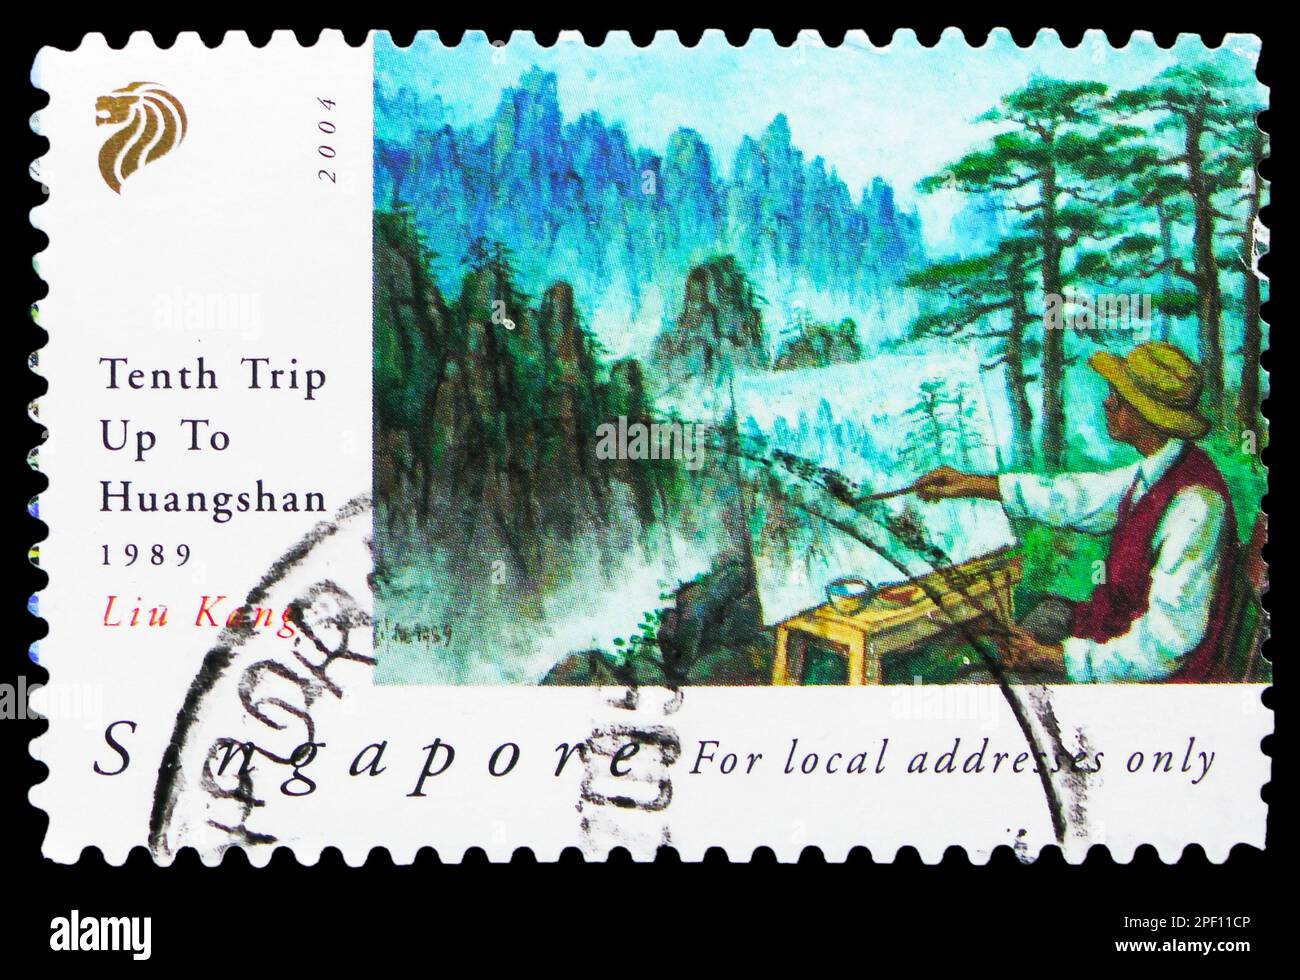 MOSCOW, RUSSIA - FEBRUARY 17, 2023: Postage stamp printed in Singapore shows 'Tenth trip up to Huangshan' 1989, Art Series - Liu Kang and Ong Kim Seng Stock Photo